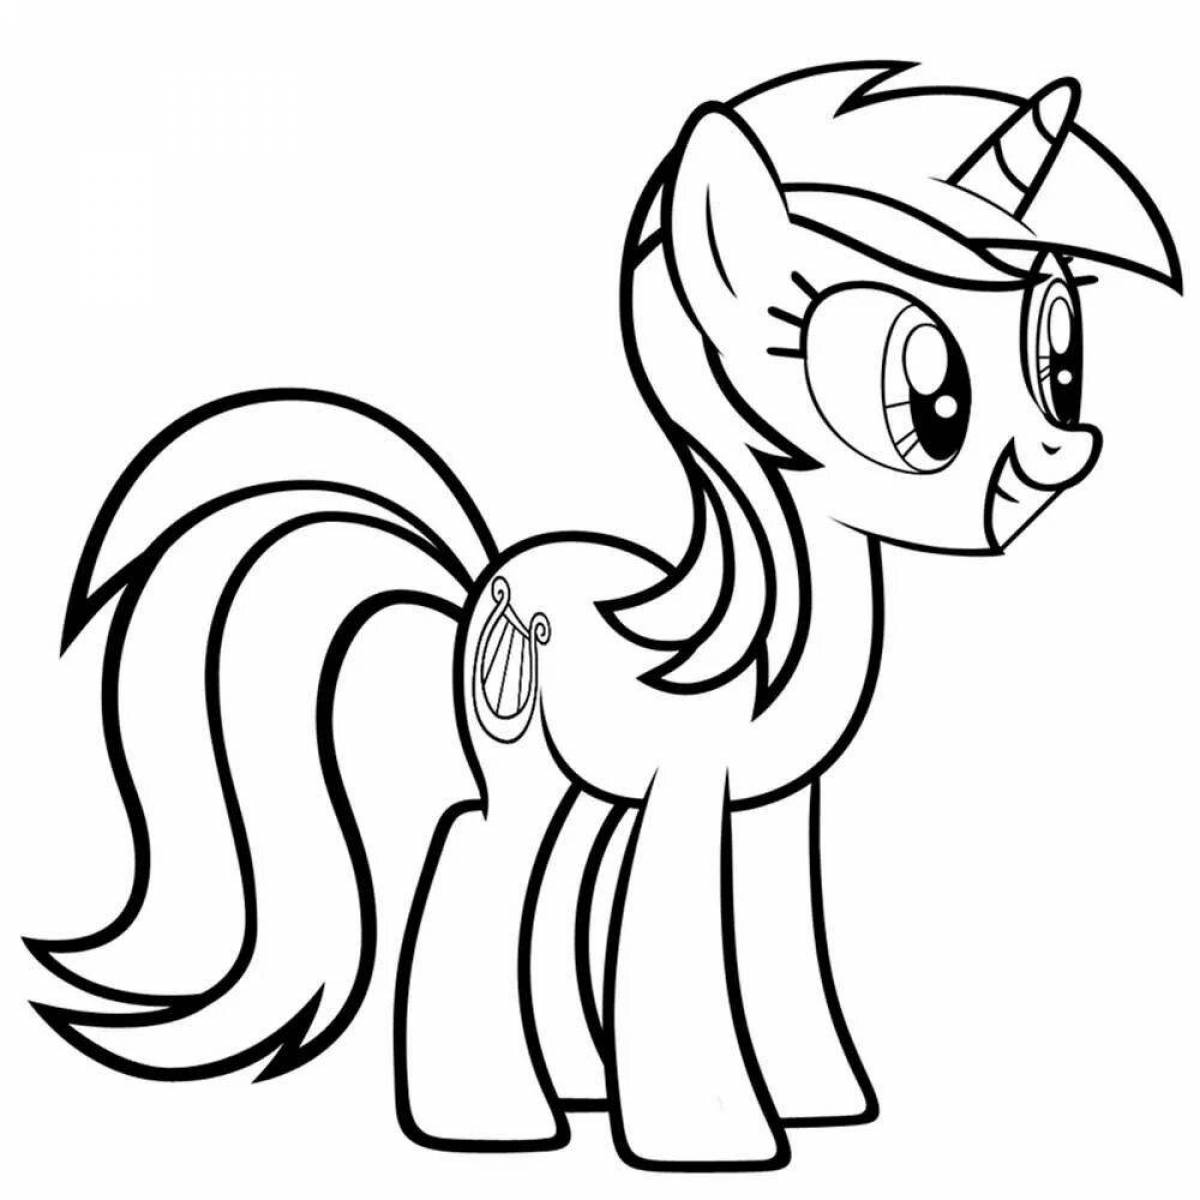 Playful pony playtime coloring page